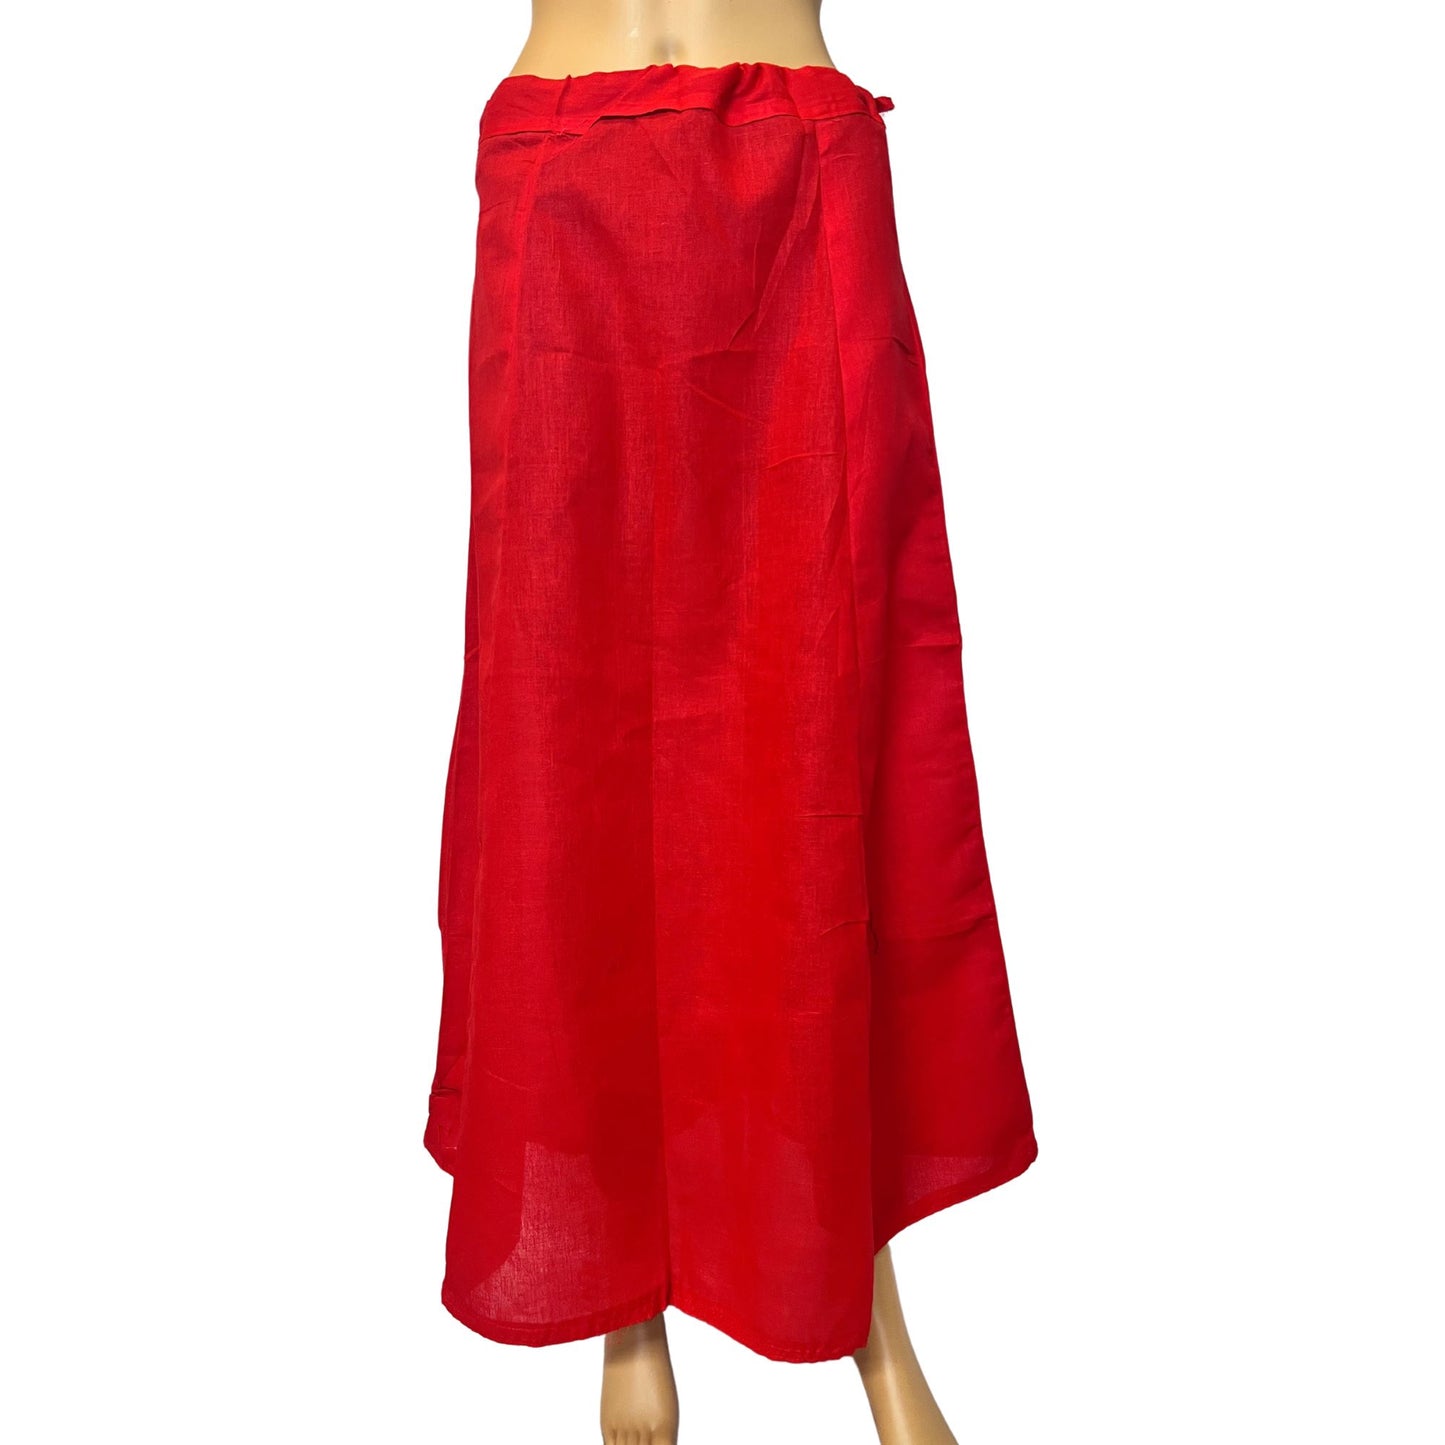 Red WIne Color Petticoat/Inner Skirts/Saya for Saree, Lining Skirt, Comfortable to wear , Readymade Petticoat